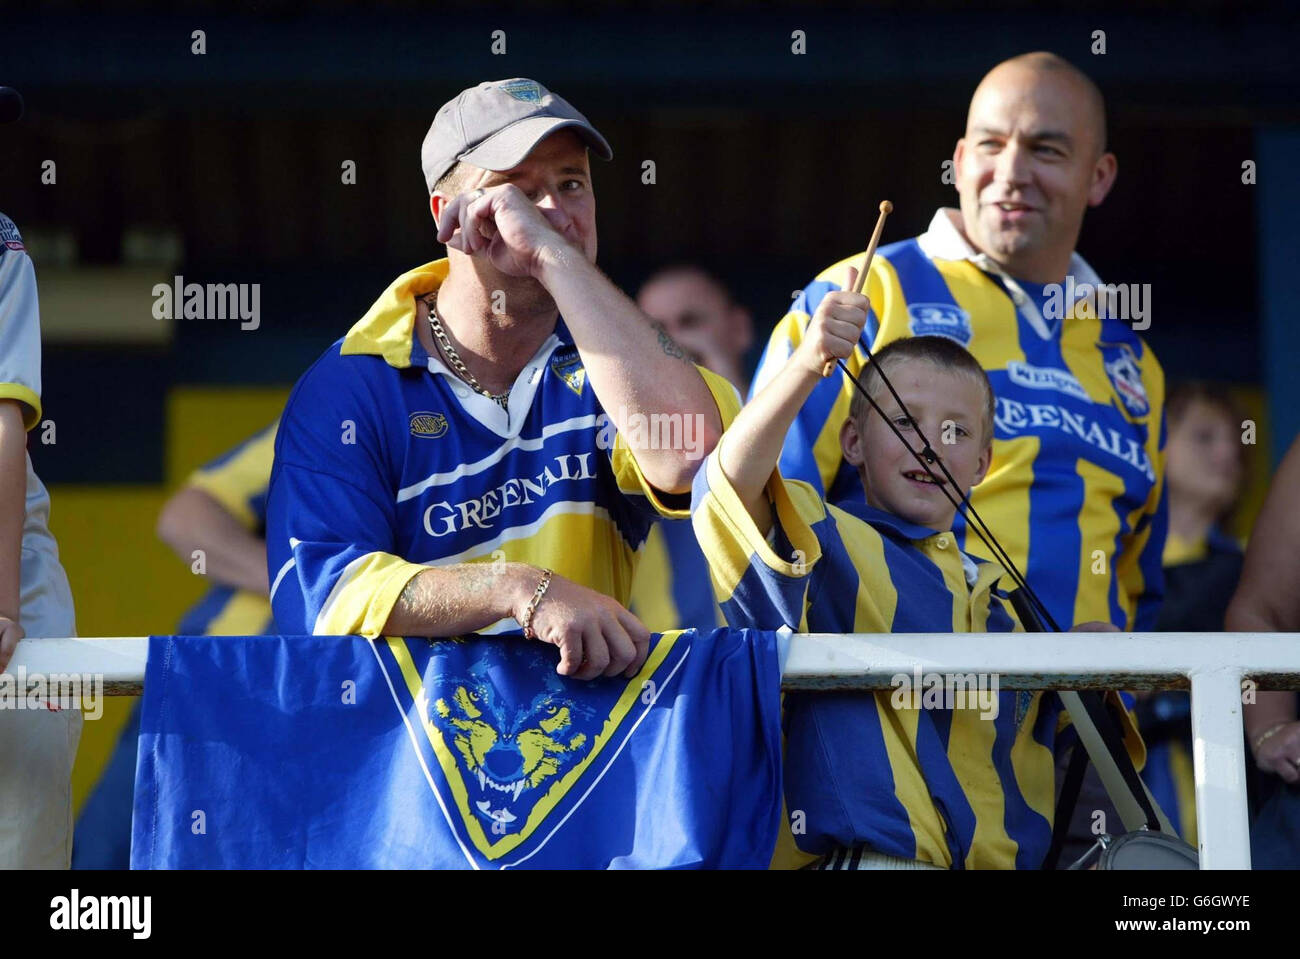 Tears as a Warrington fan mourns the end of Warrington's stay at the Wildespool ground during the Tetley's Super League match between Warrington and Wakefield at Wilderspool, Warrington. Stock Photo